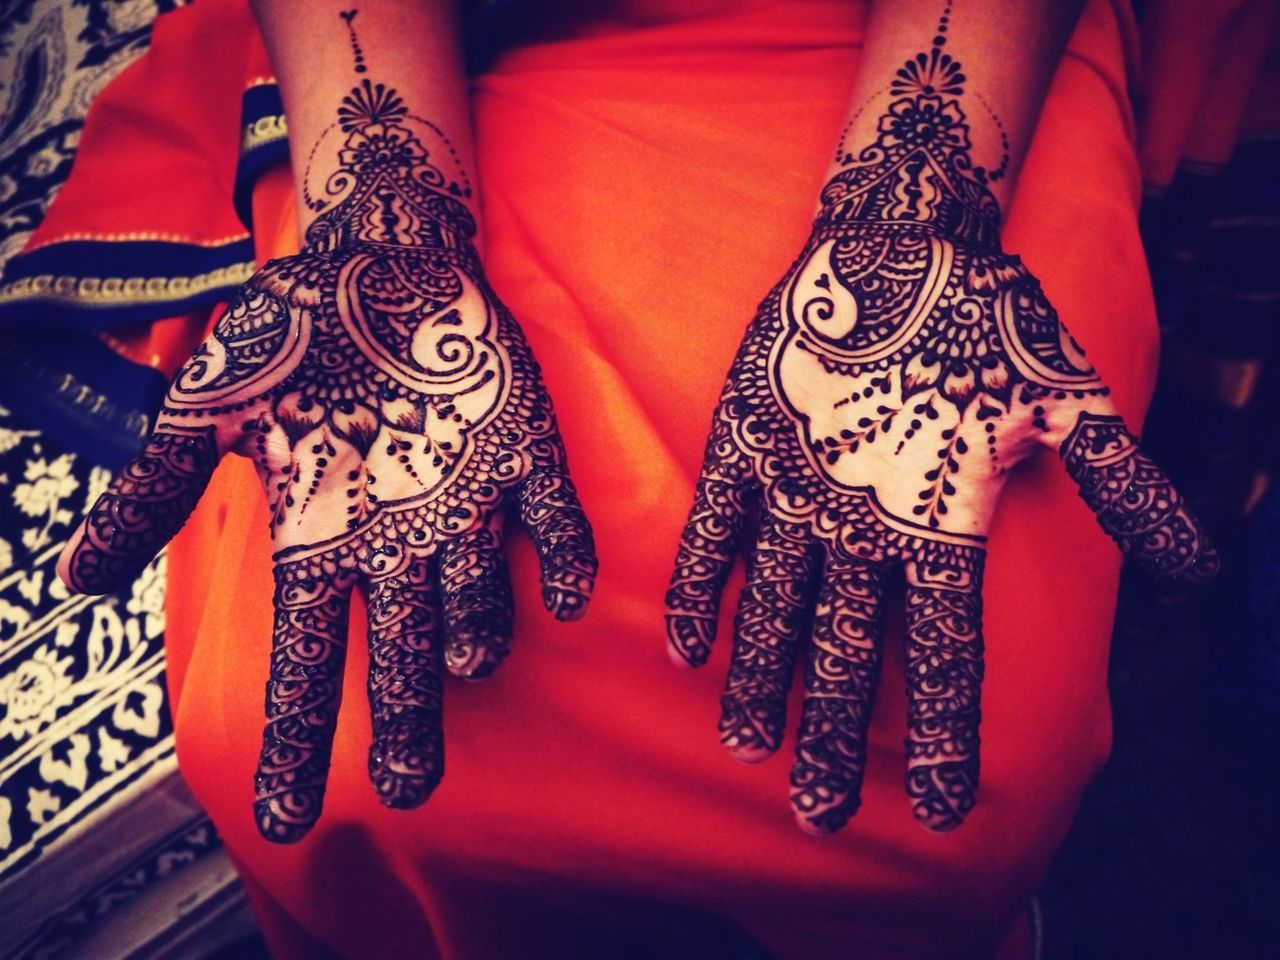 Midsection of woman with henna tattoo on hands